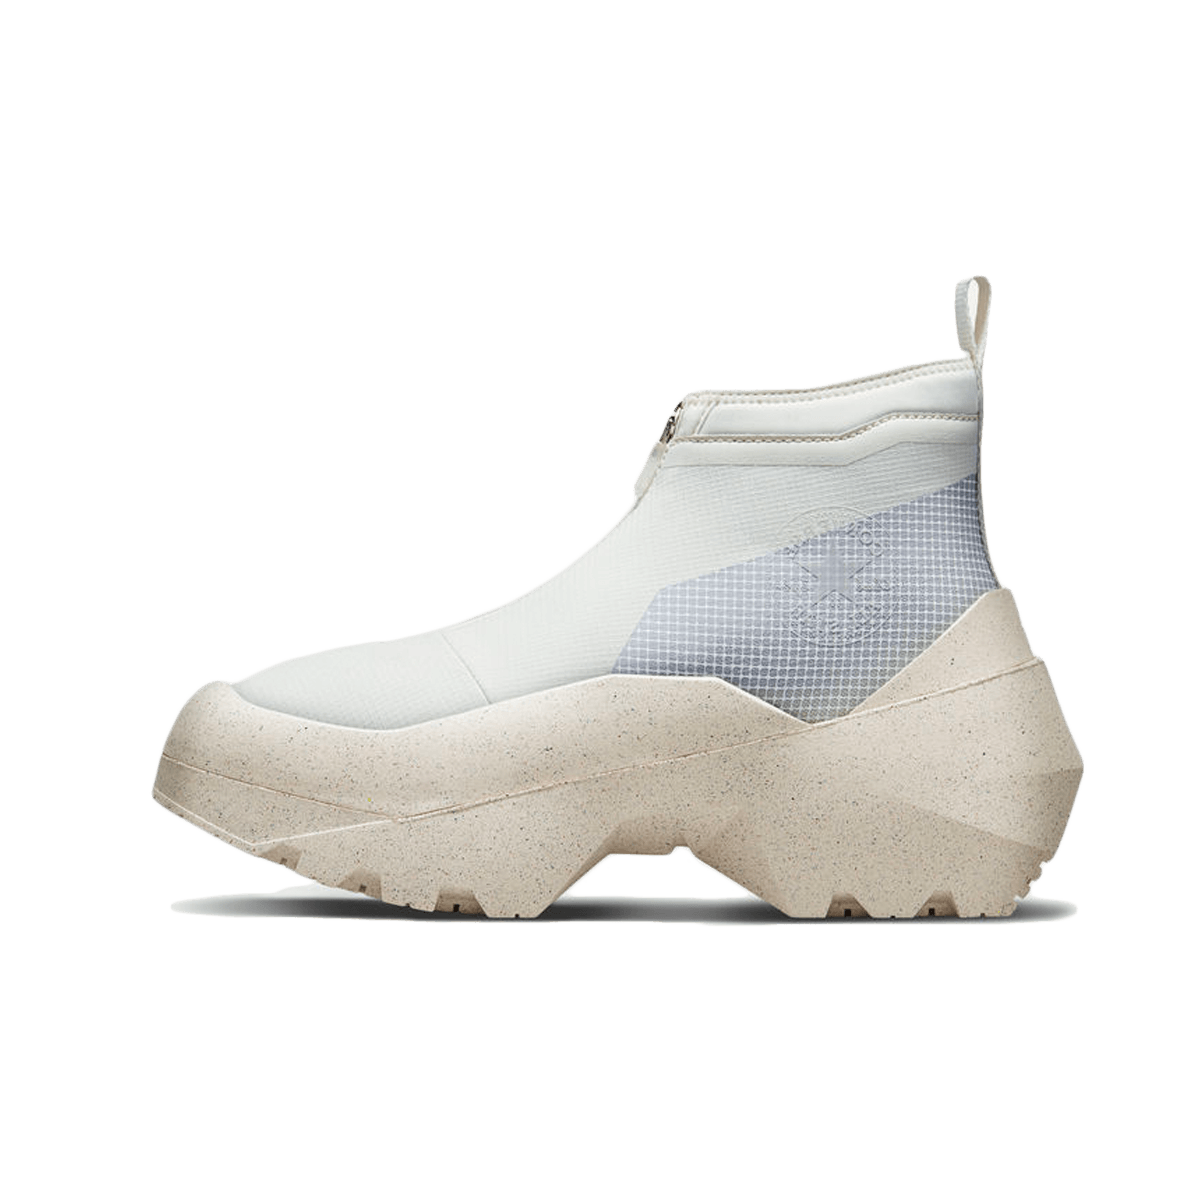 A-COLD-WALL x Converse Geo Forma Boot 'Lily White' A04136C